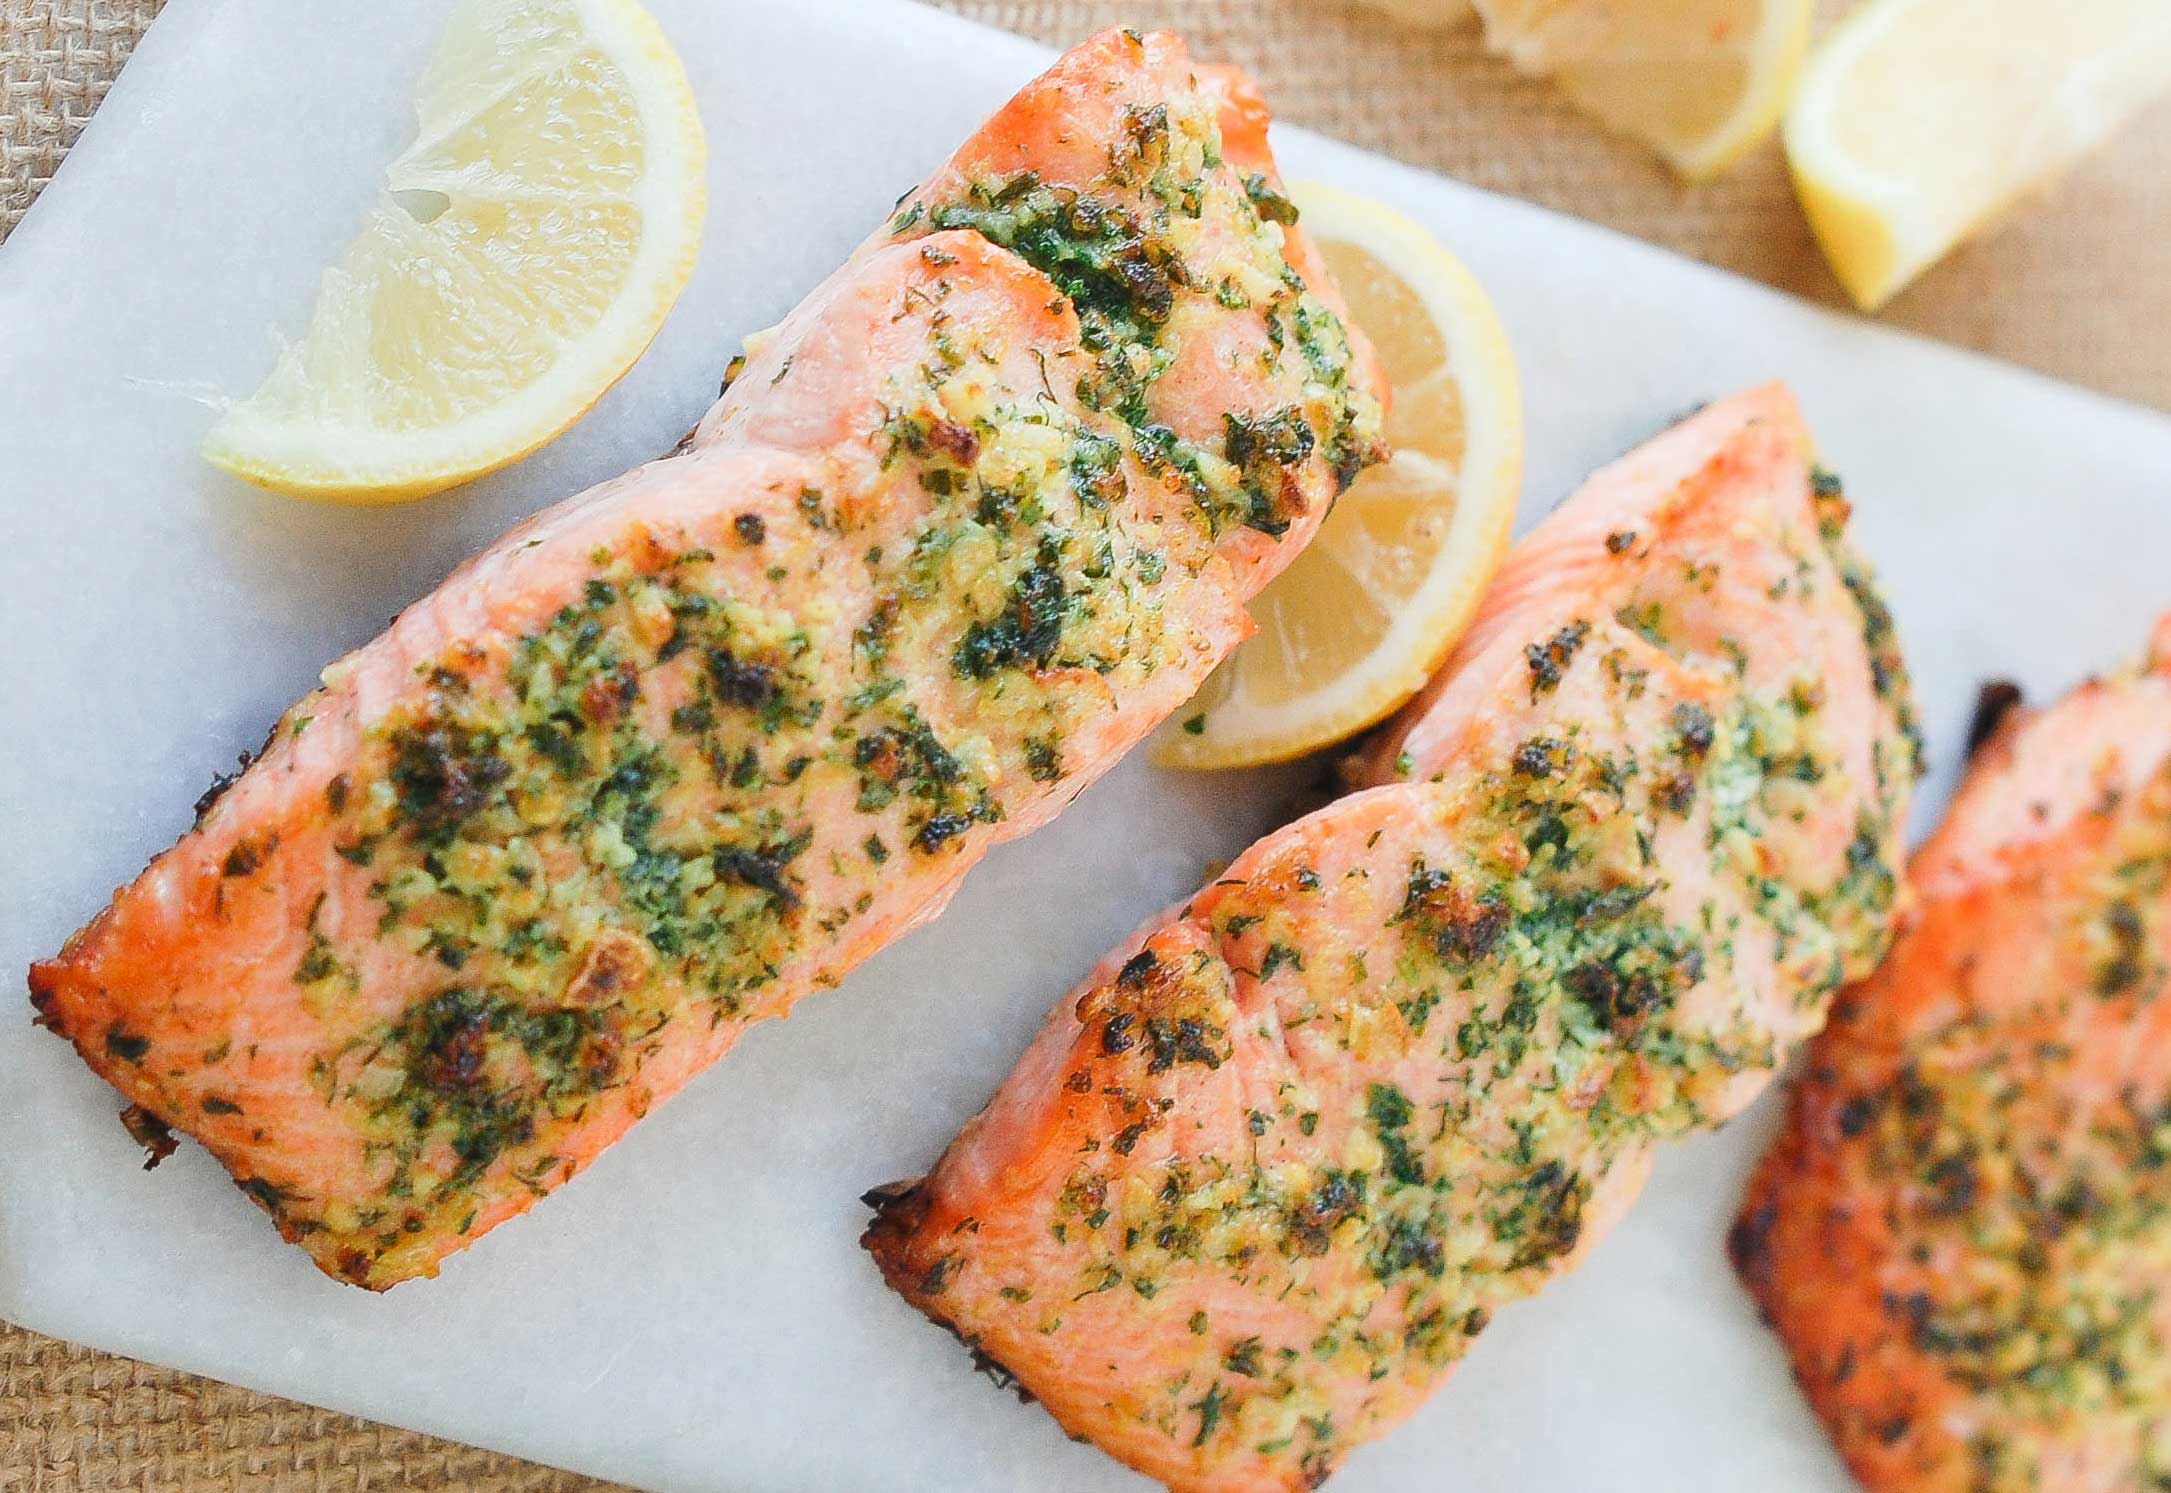 Grilled Salmon | All recipes blog